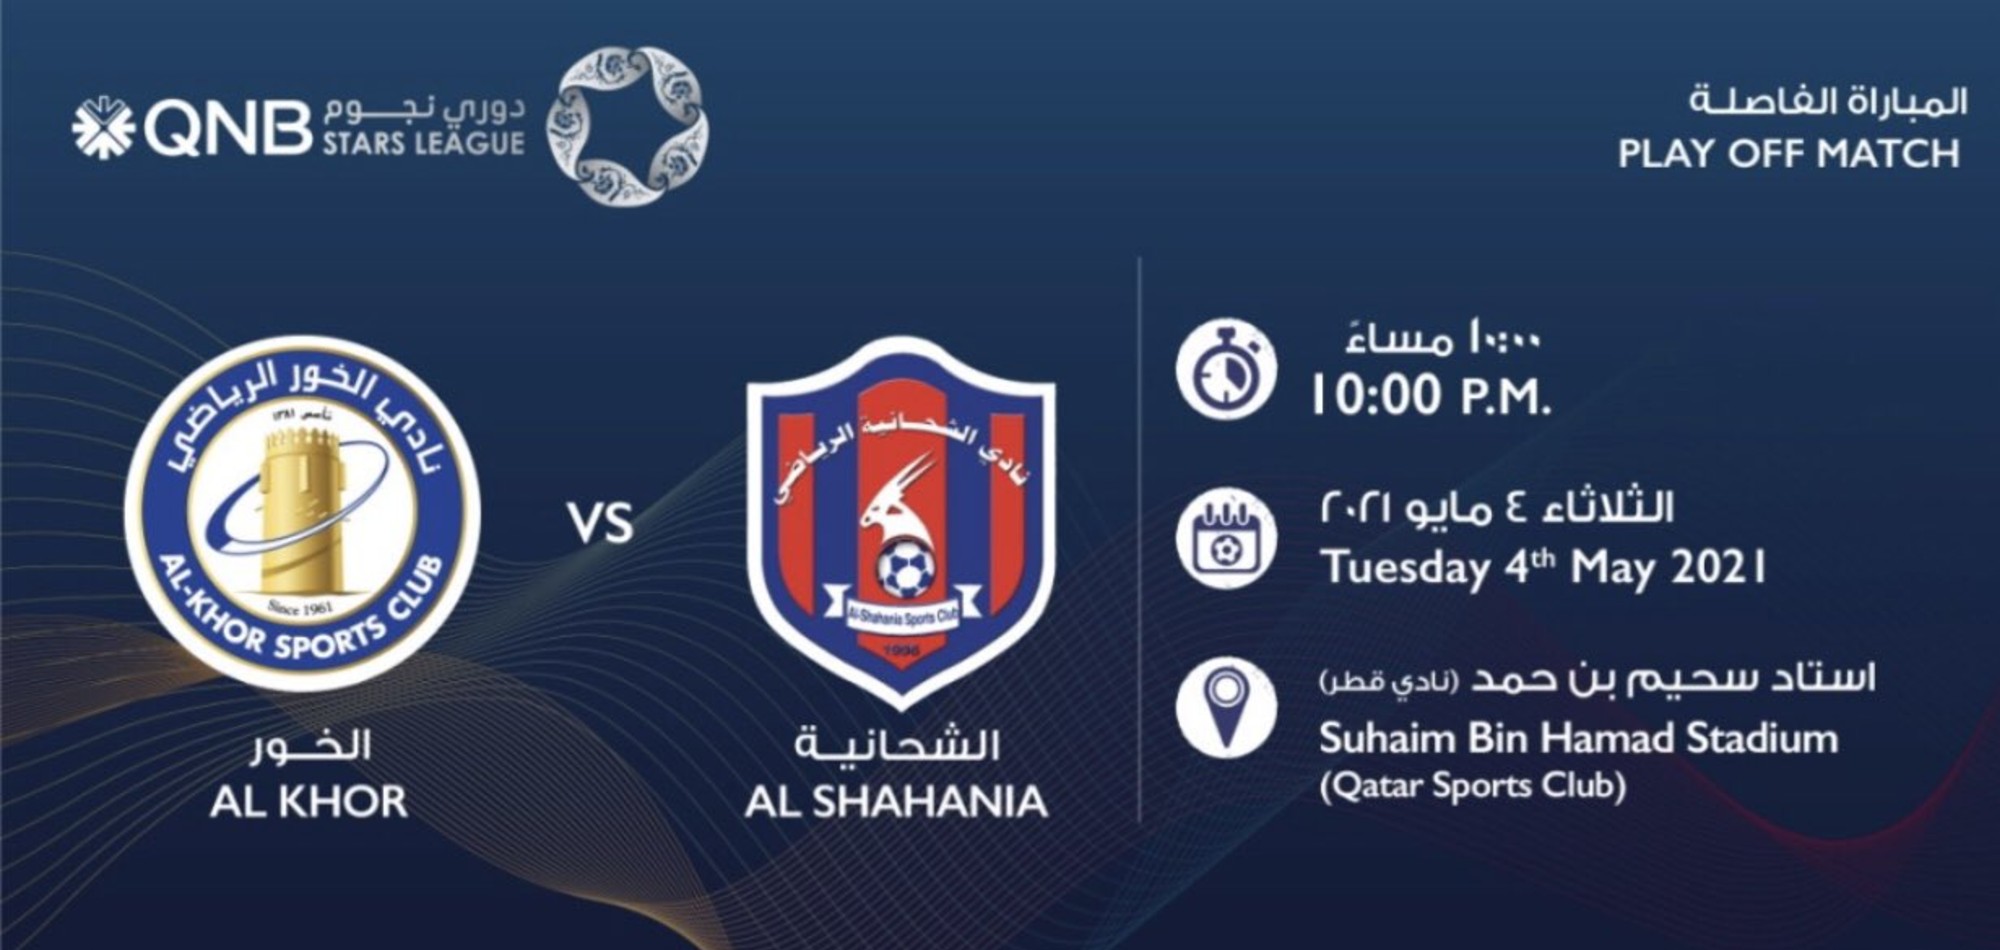 Al Khor vs Al Shahania battle it out for a spot in the top flight on May 4